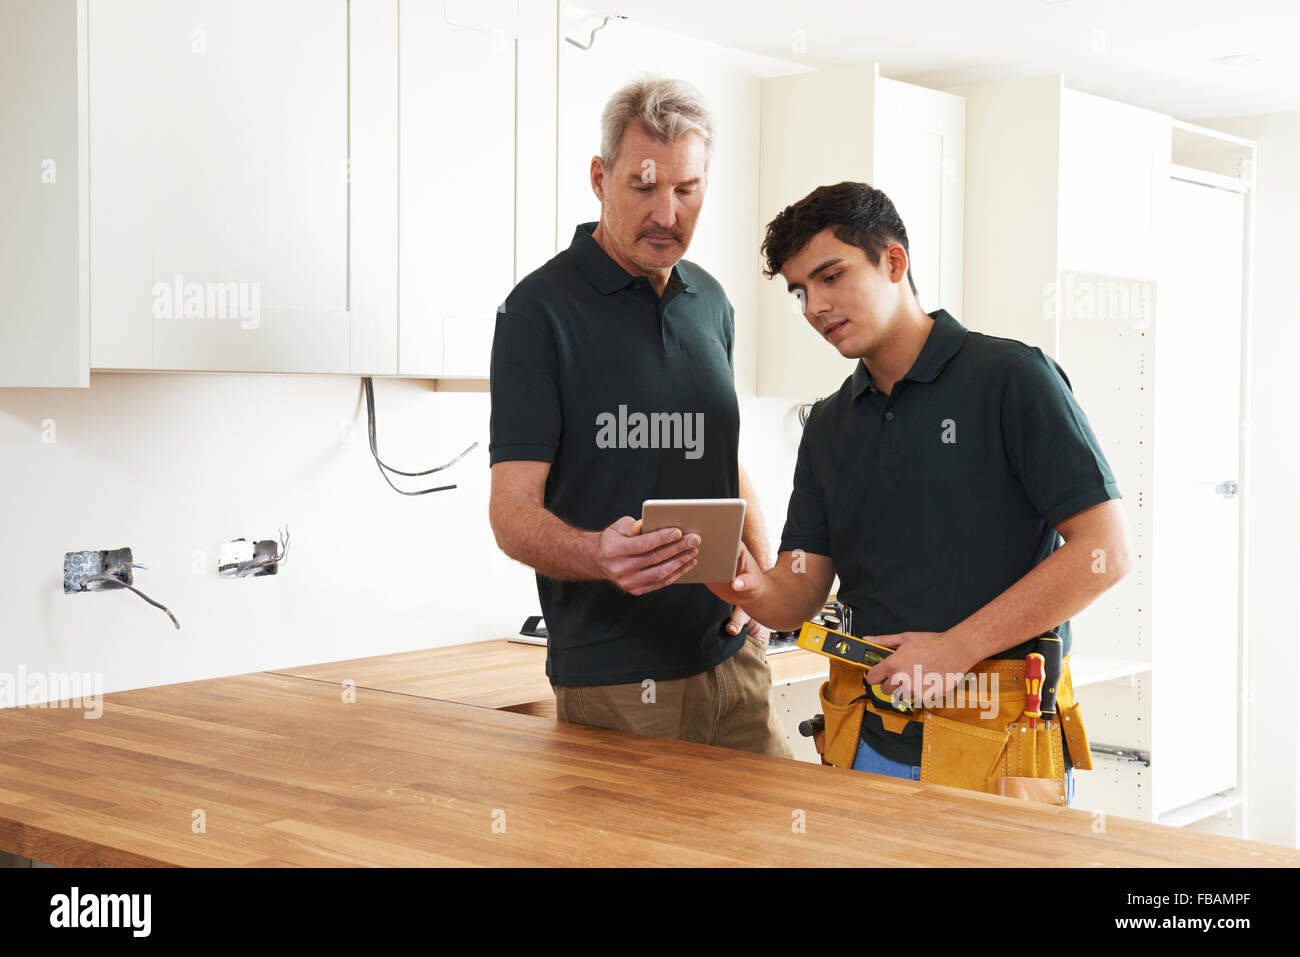 Carpenter And Apprentice With Digital Tablet Fitting Luxury Kitchen Stock Photo